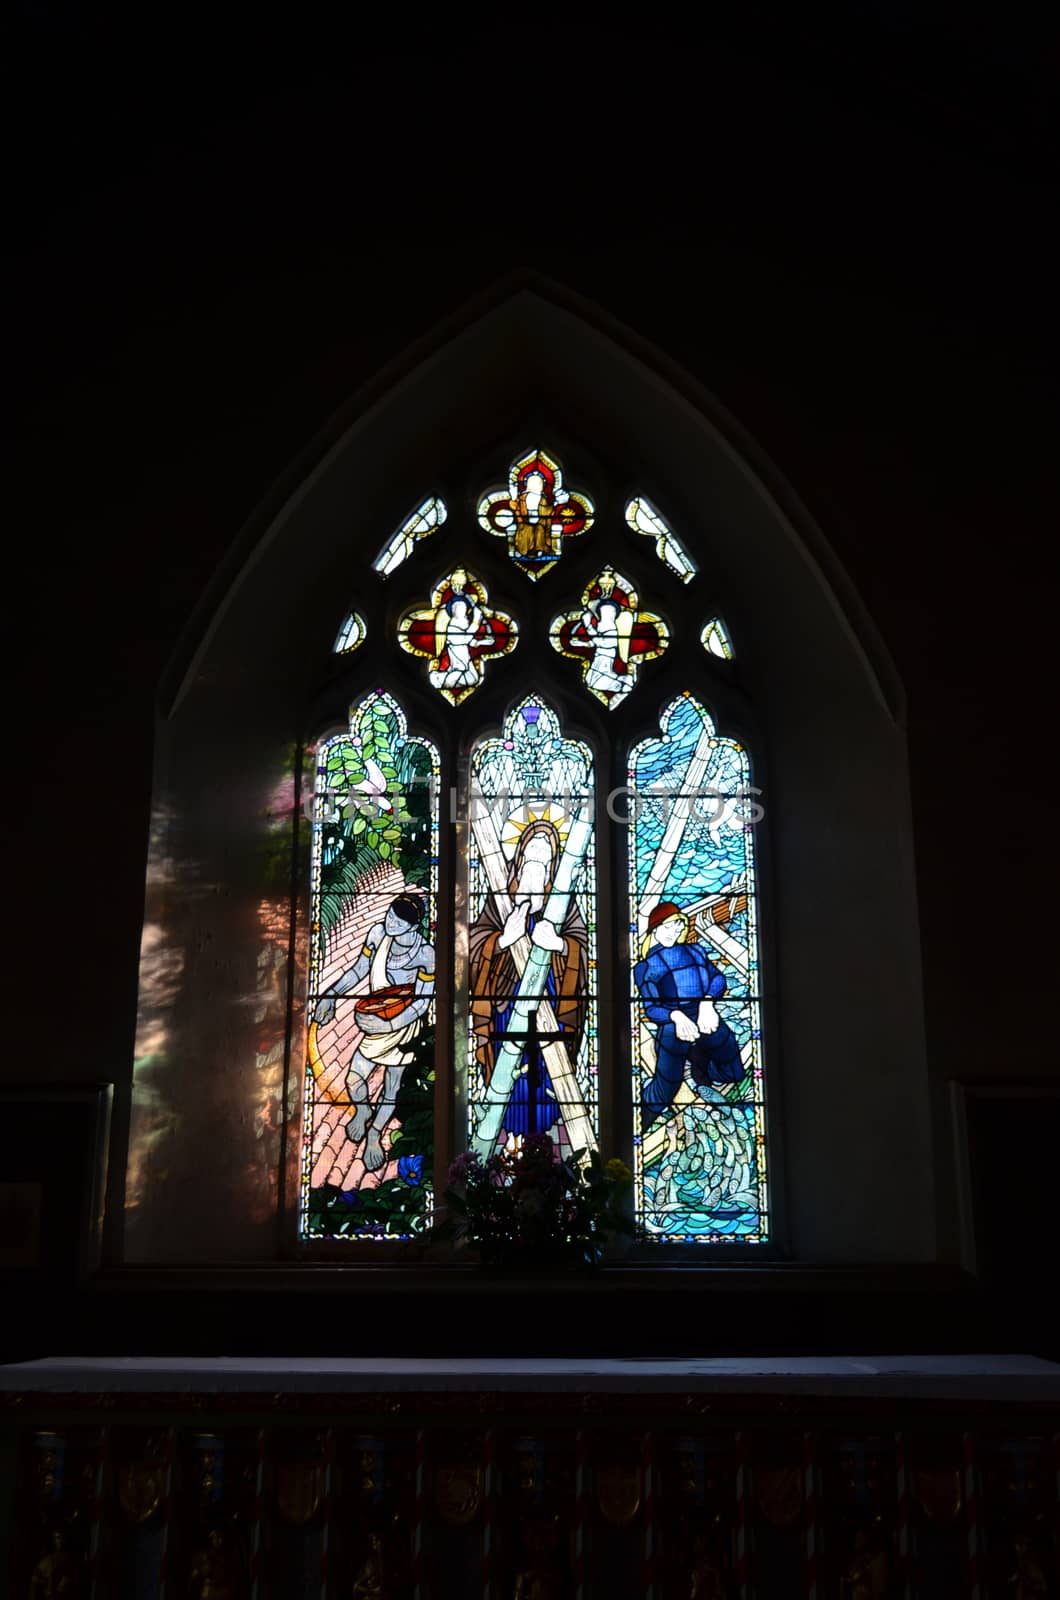 Brightly coloured stained glass window above a church alter In England.